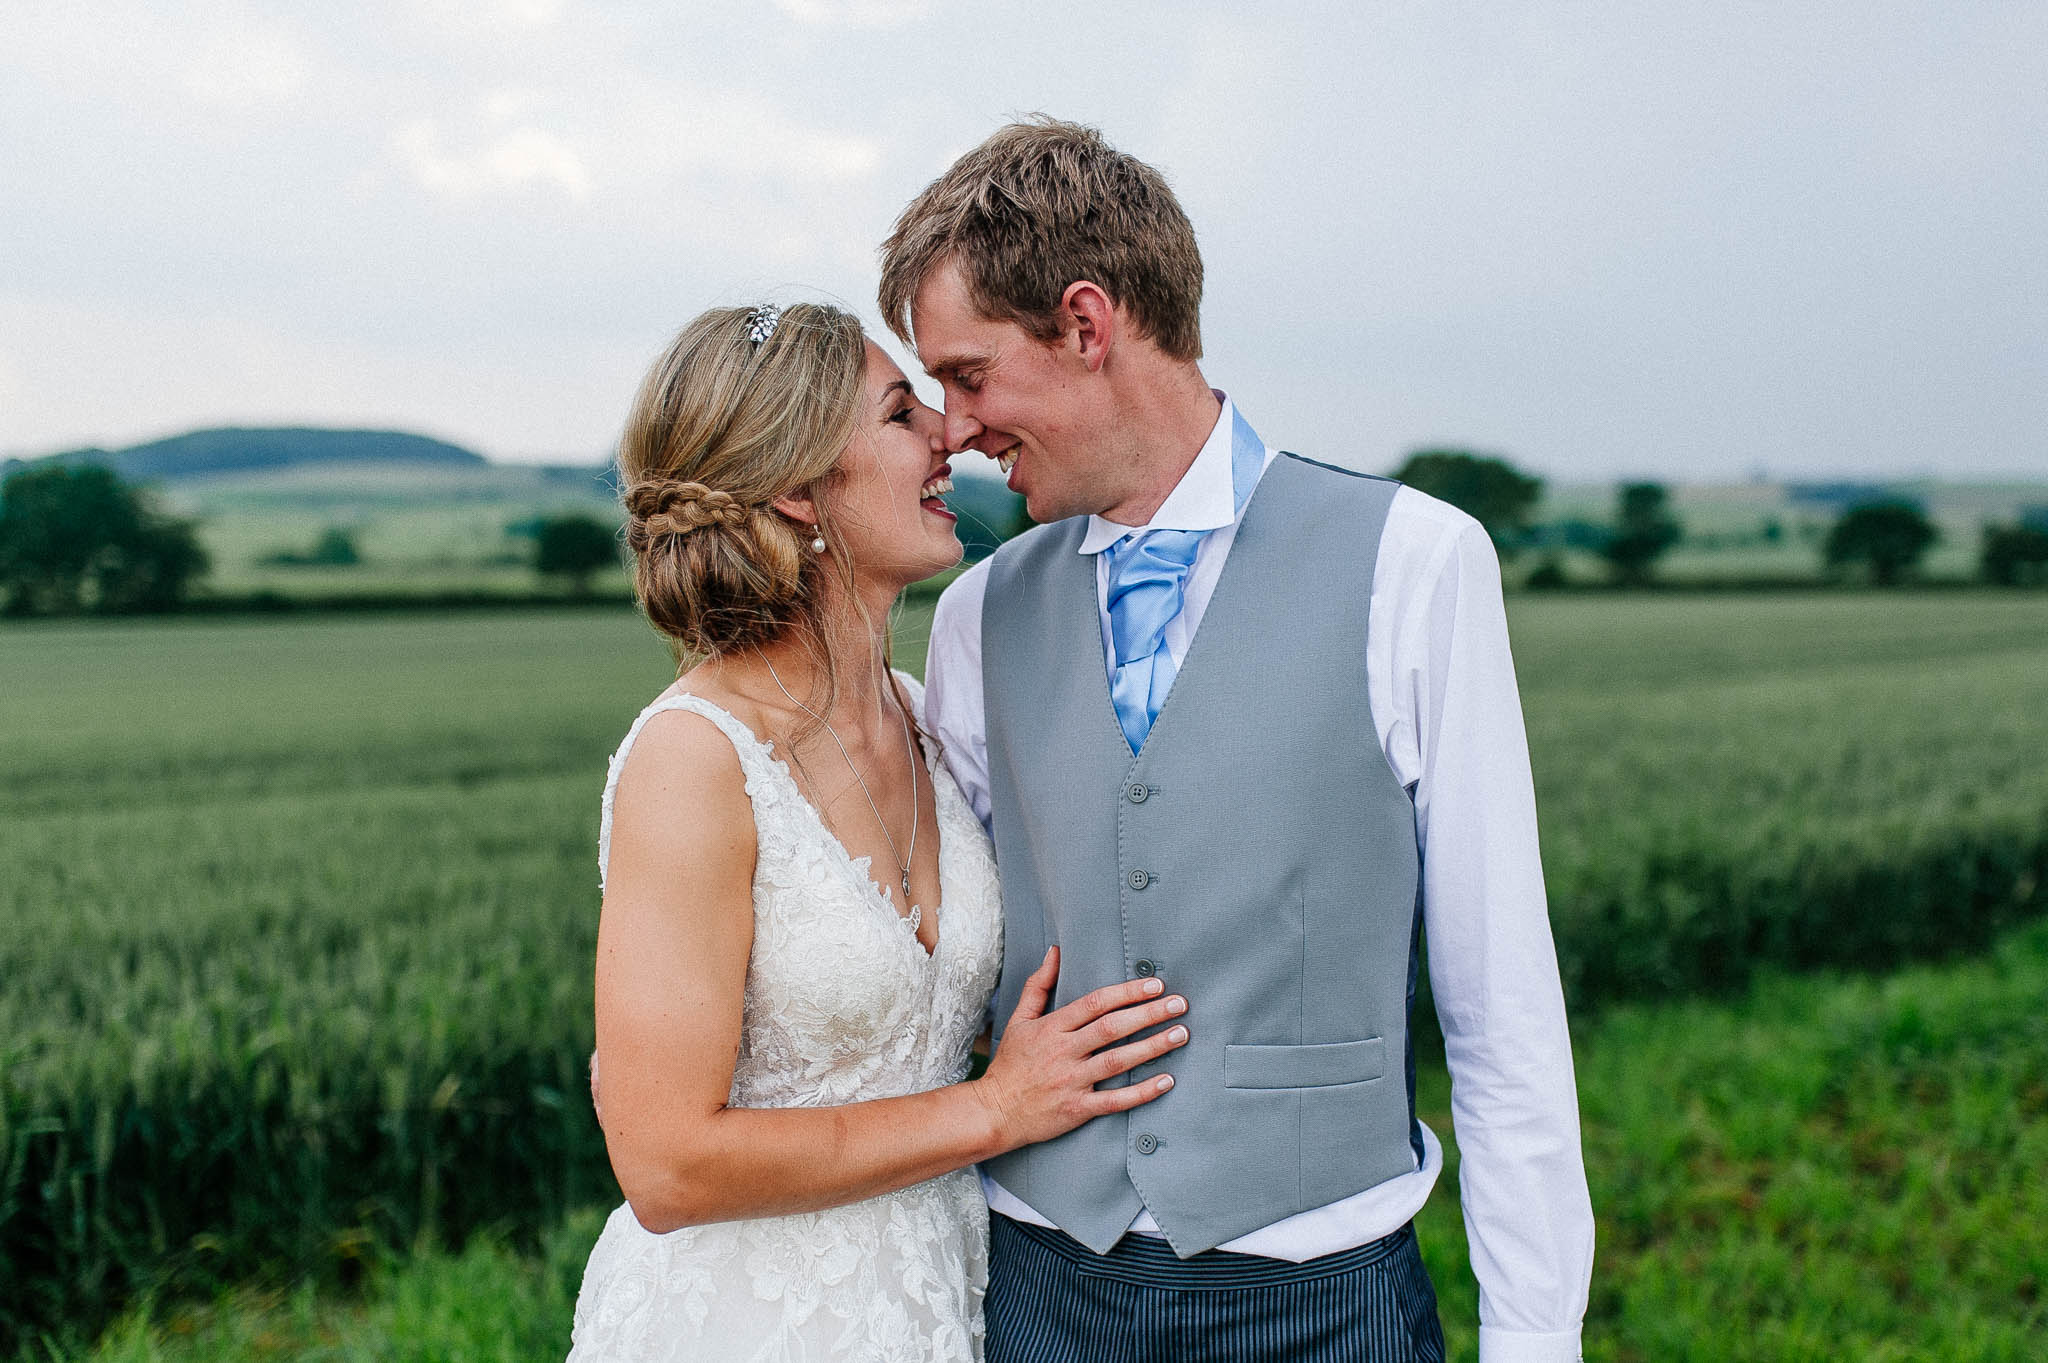 How much does a wedding photographer cost in the UK? A comprehensive guide for couples.